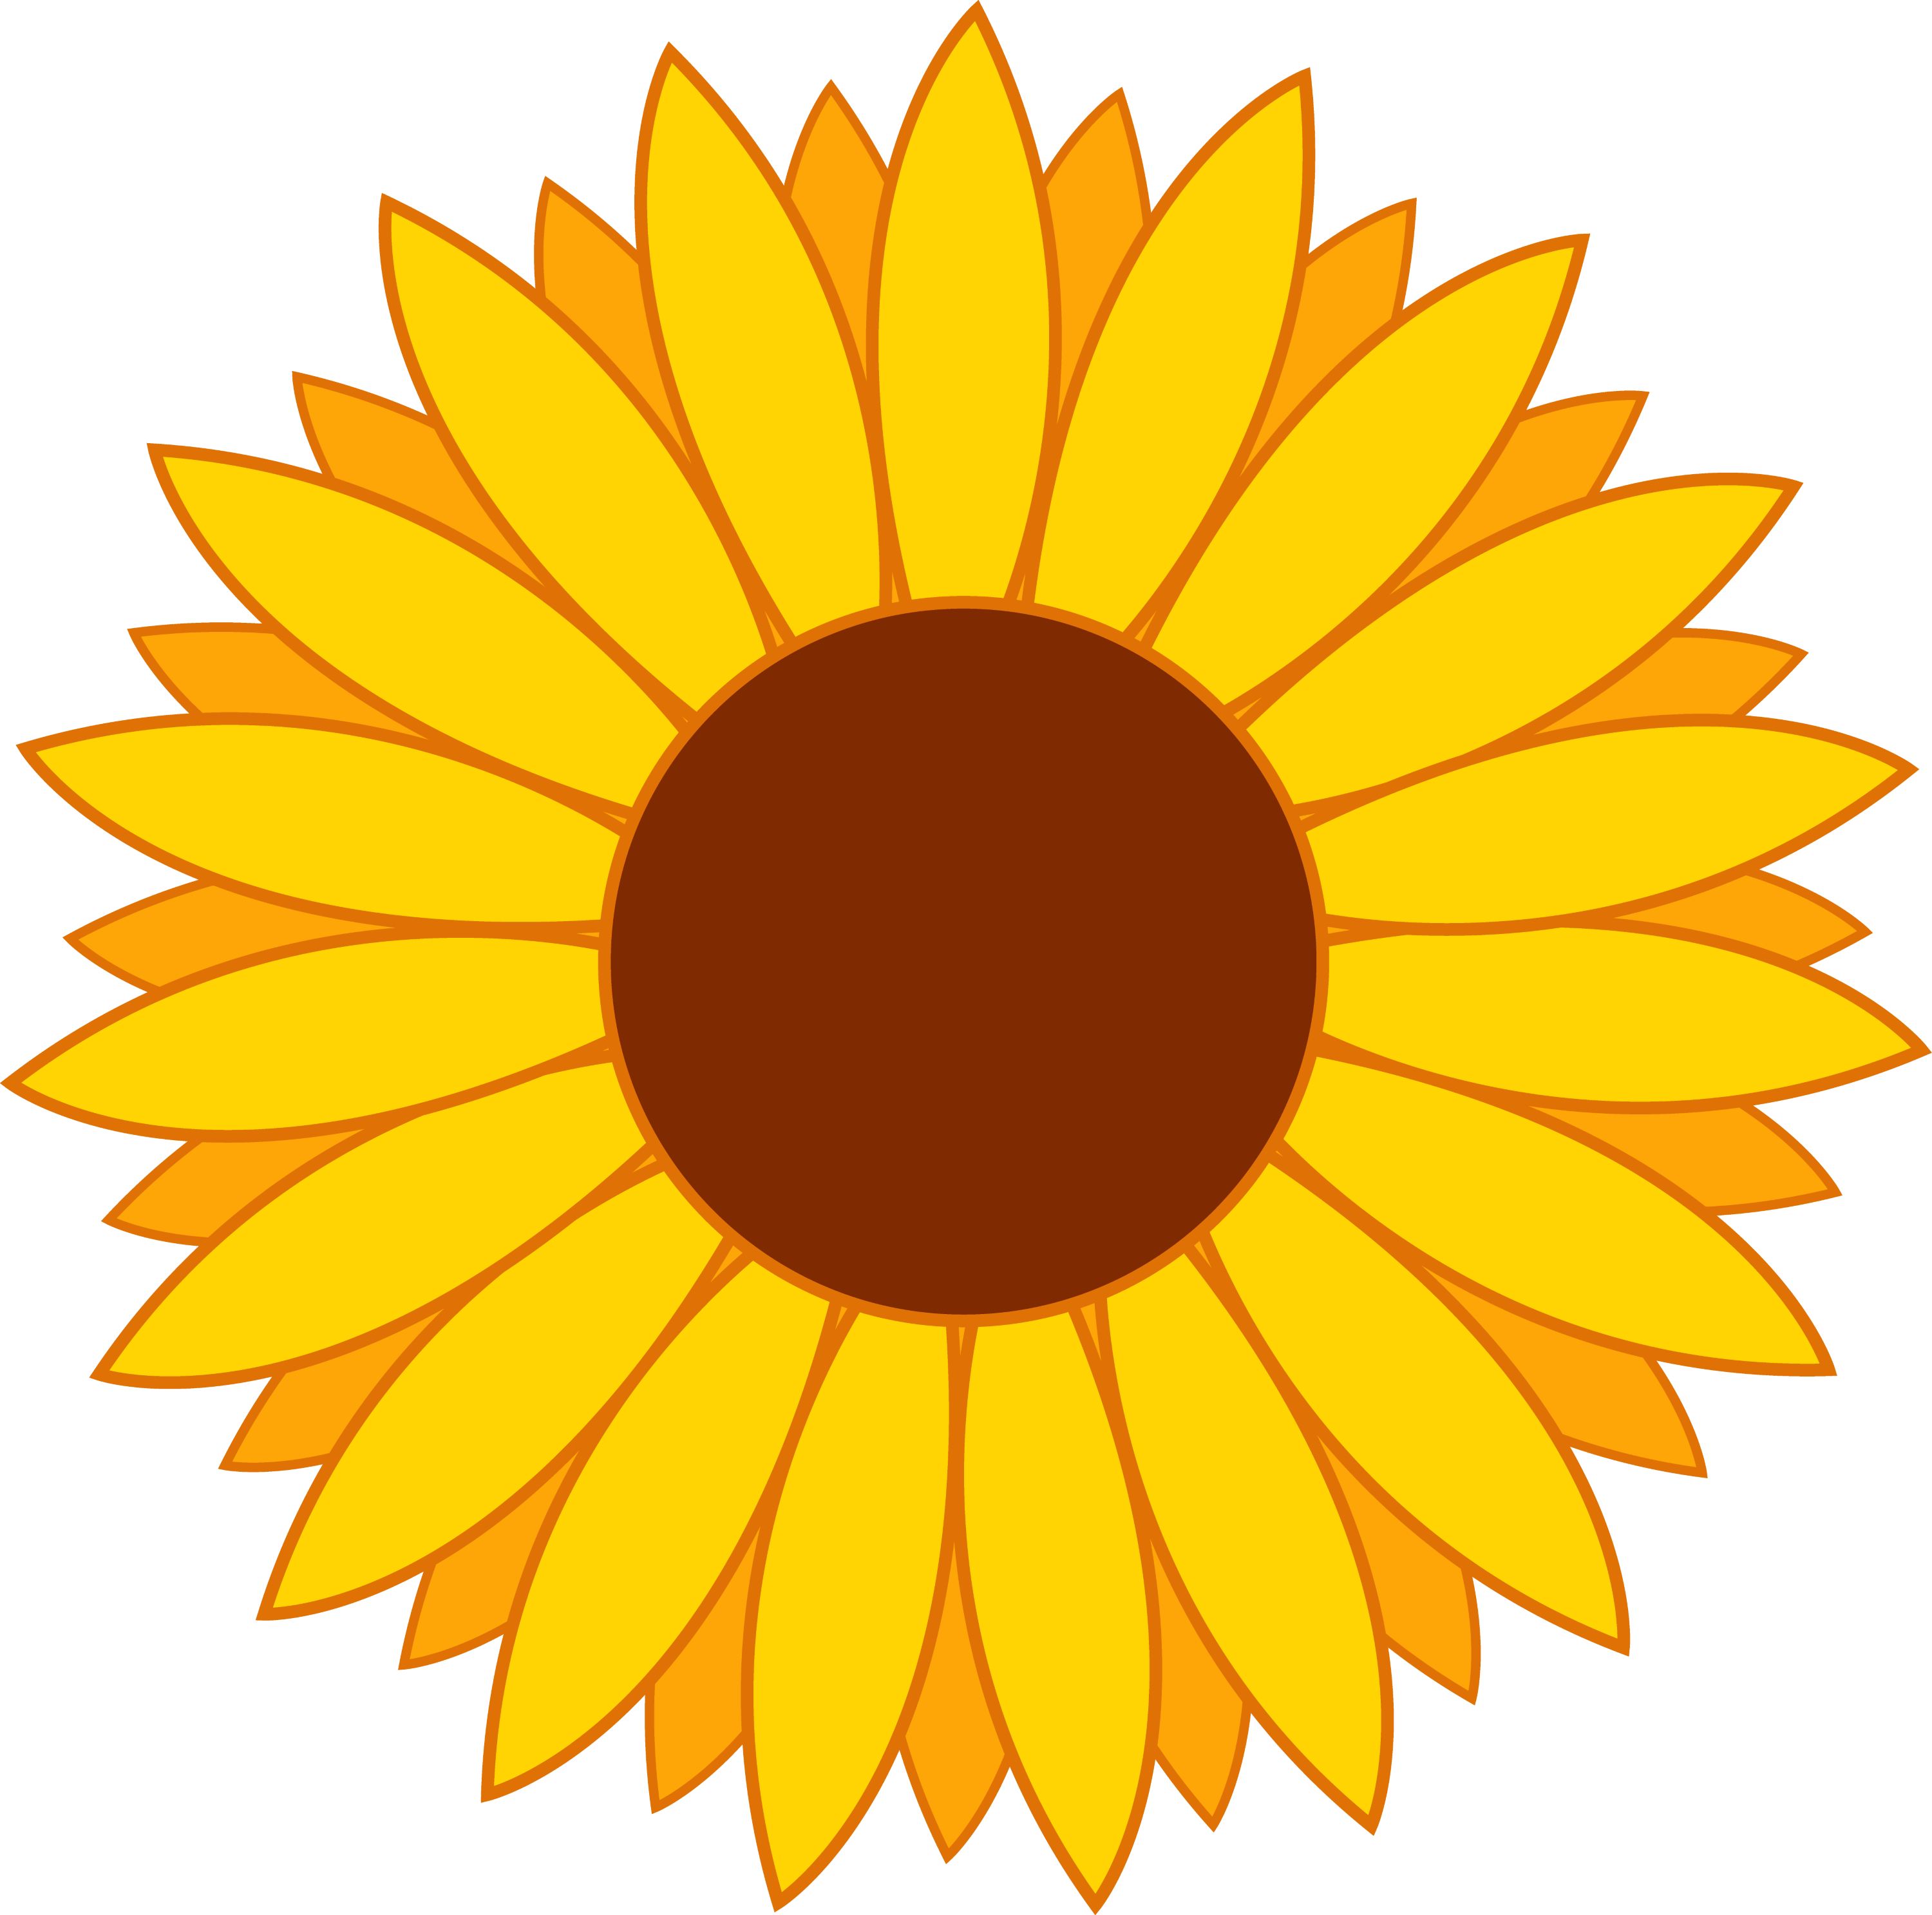 Download Simple Yellow Sunflower Design - Free Clip Art